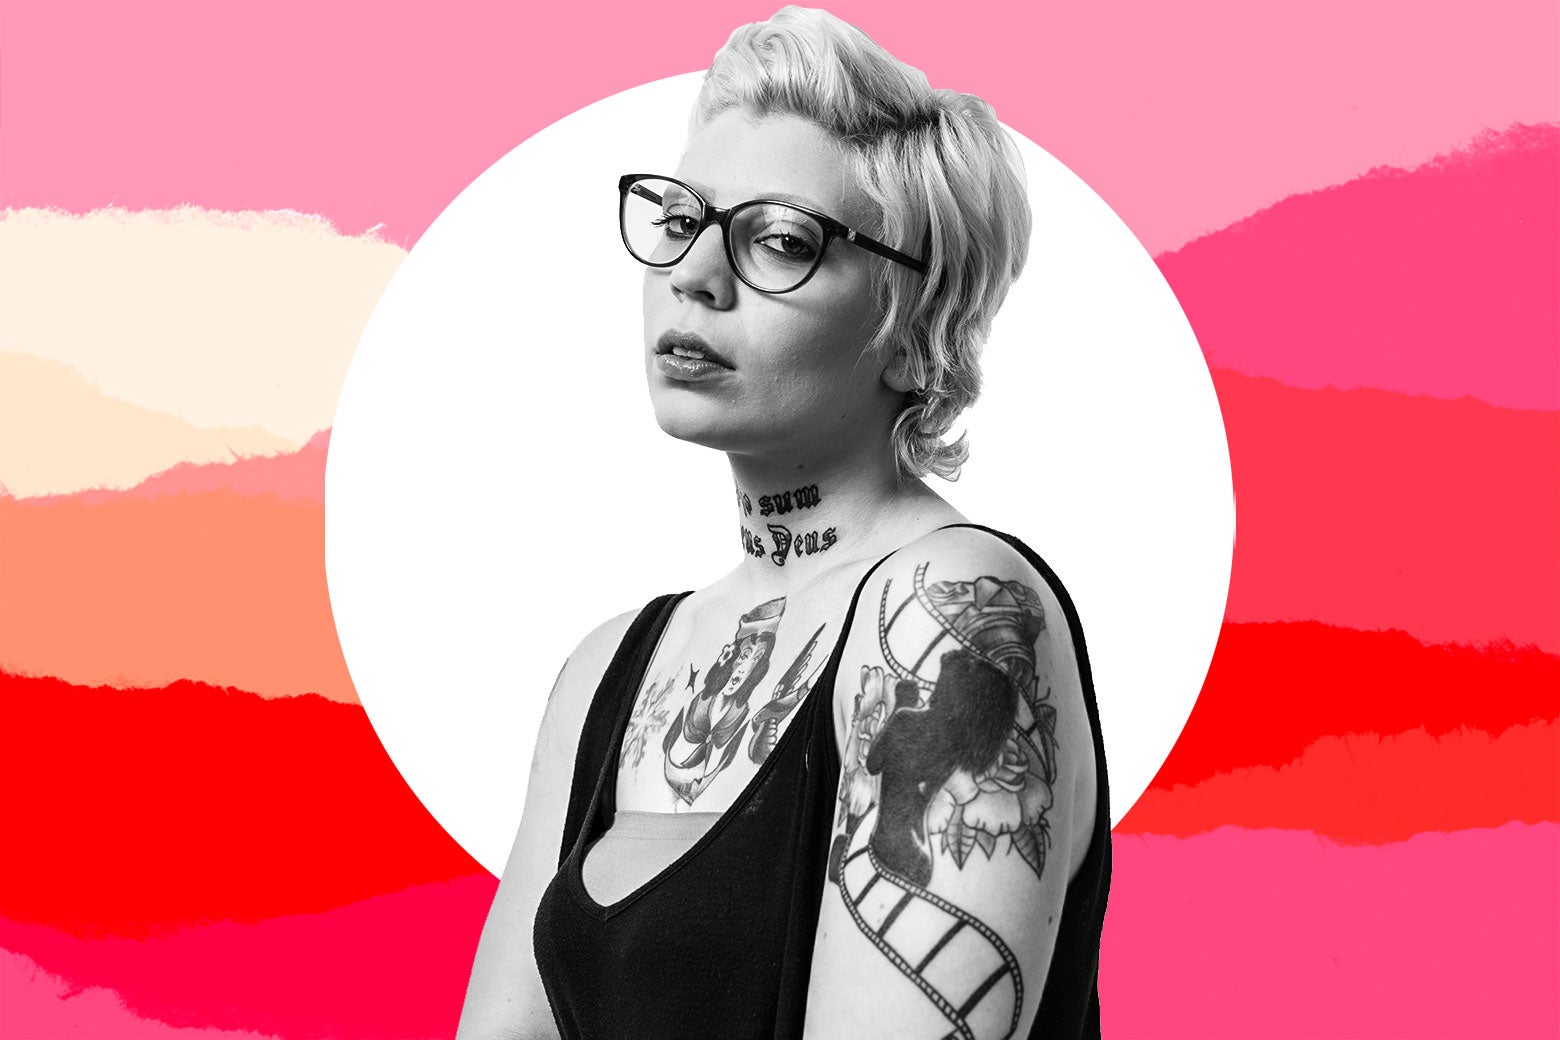 A woman with tattoos and glasses looks lonely.